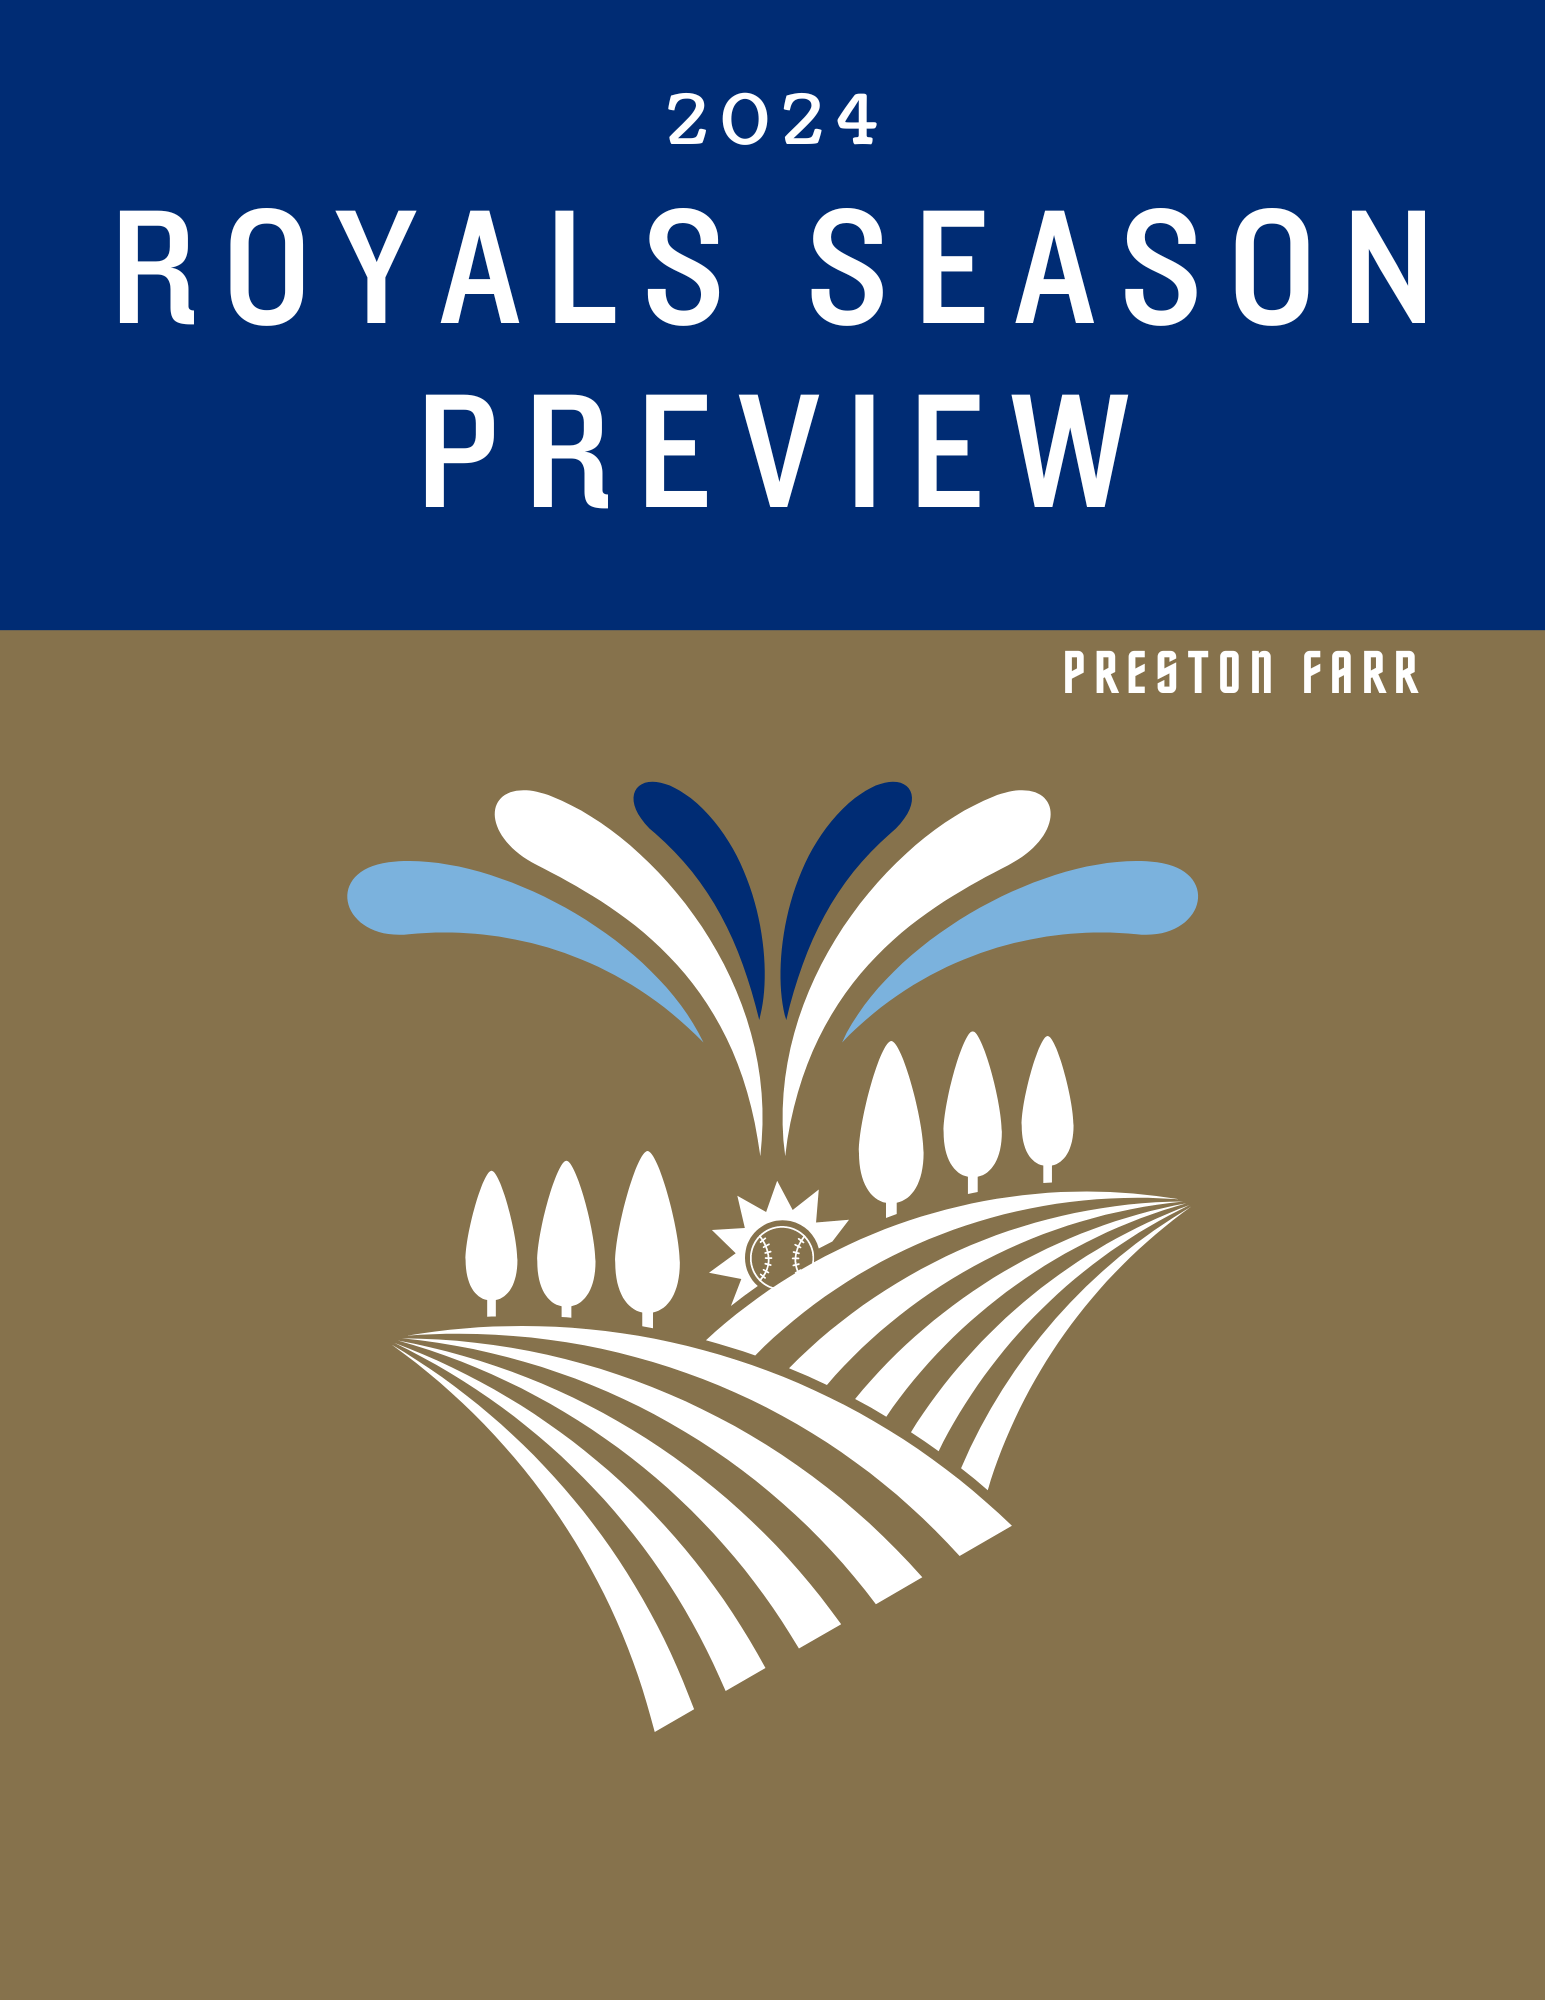 OUT NOW! Pick up the 2024 Royals Season Preview today!